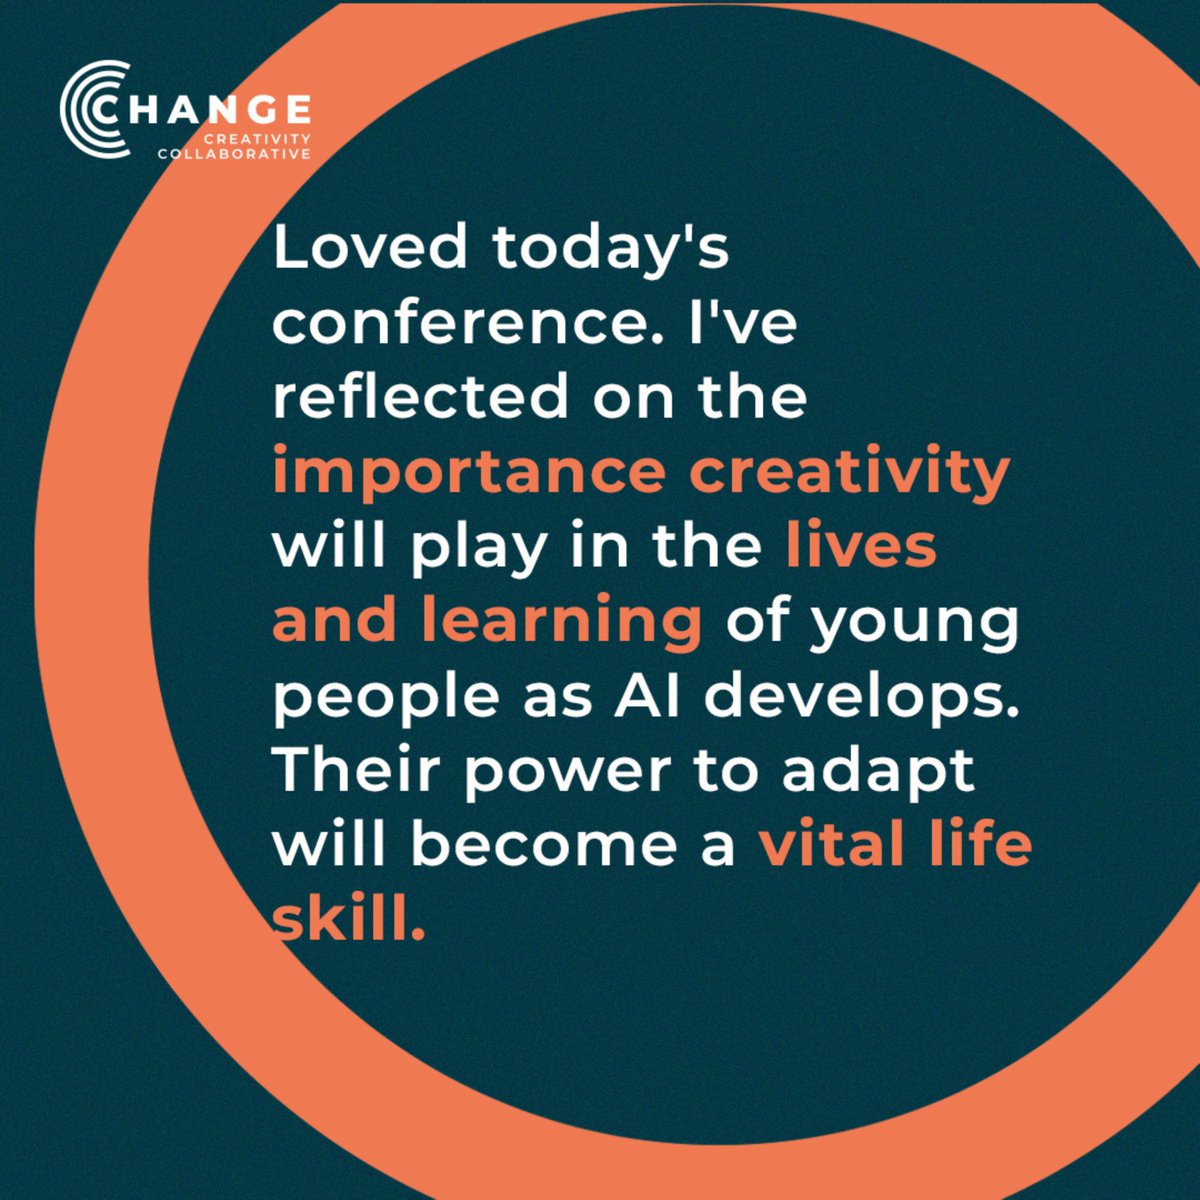 Counting down to #CCHANGECONFERENCE24 and feeling inspired by the feedback from last year's event. #collectivelearning #creativelearning Loved today's conference. I've reflected on the importance creativity will play in the lives and learning of young people as AI develops.…